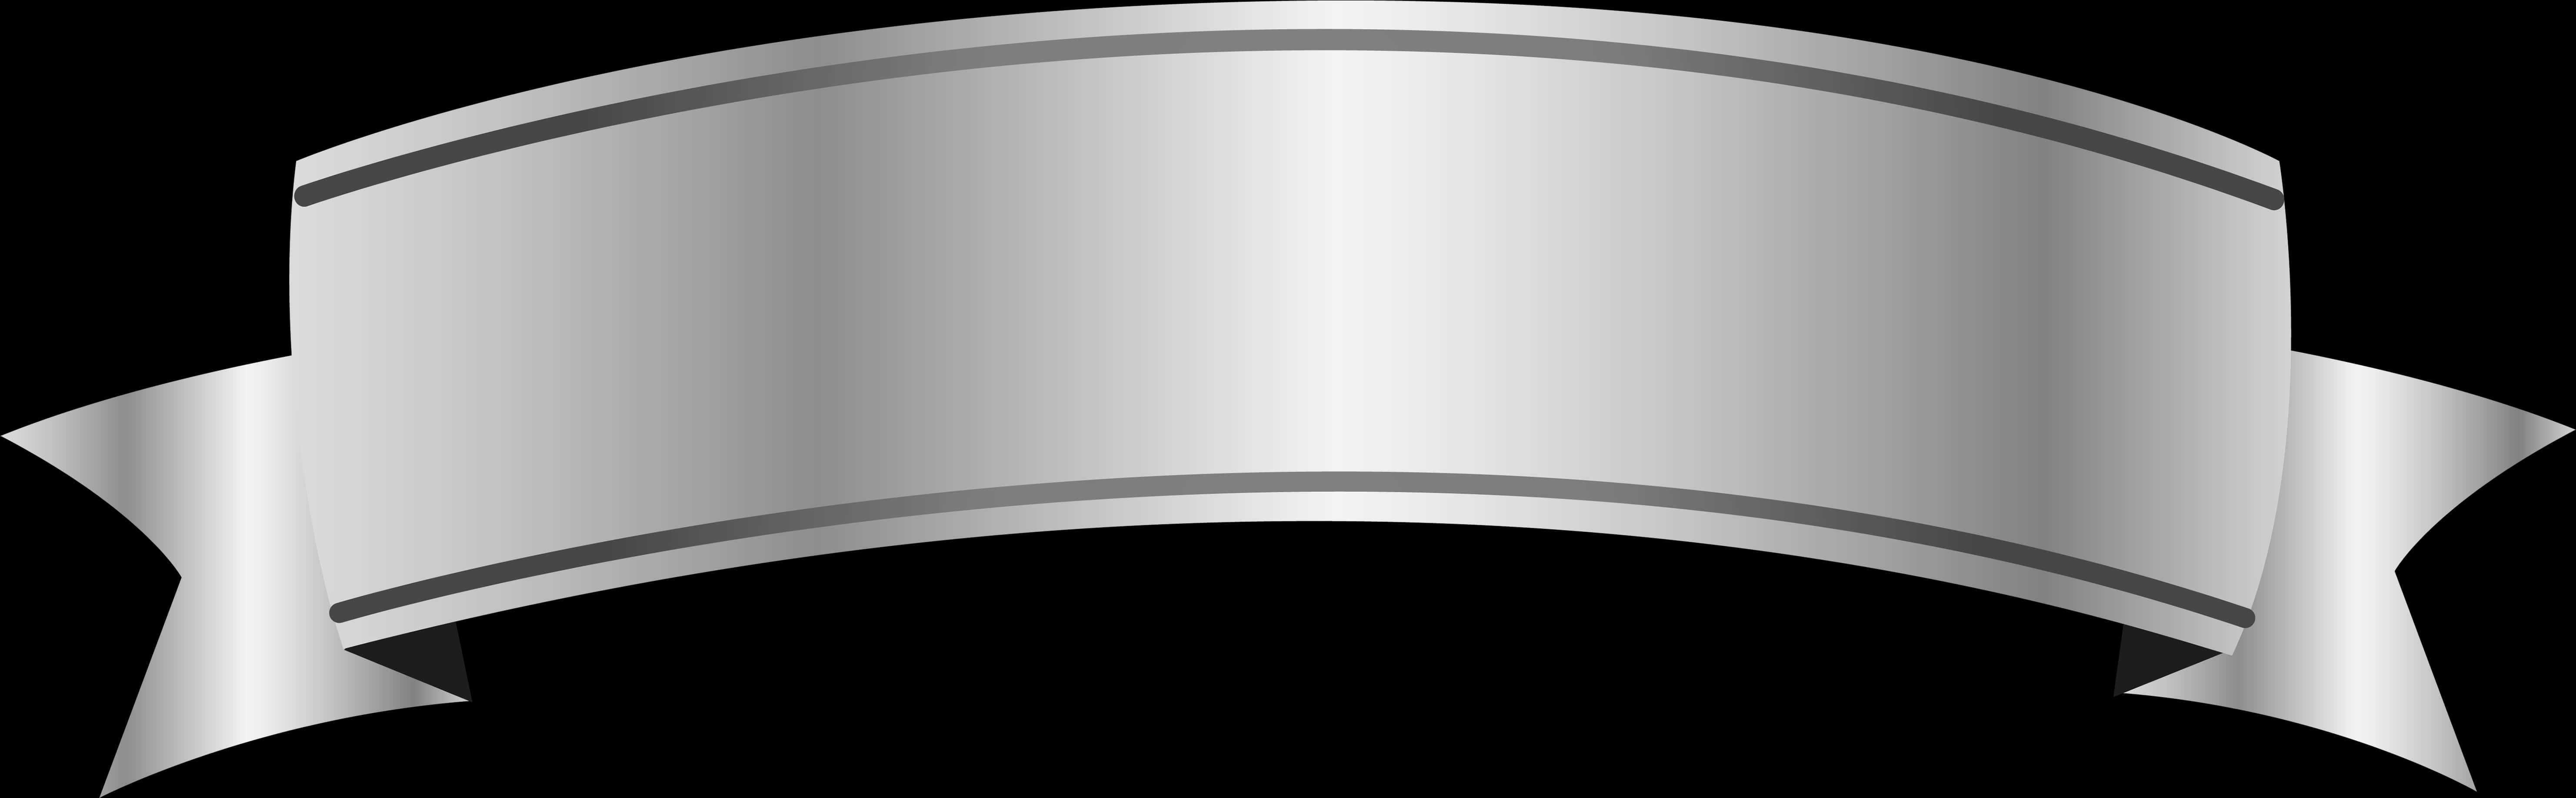 Silver Banner Ribbon Graphic PNG